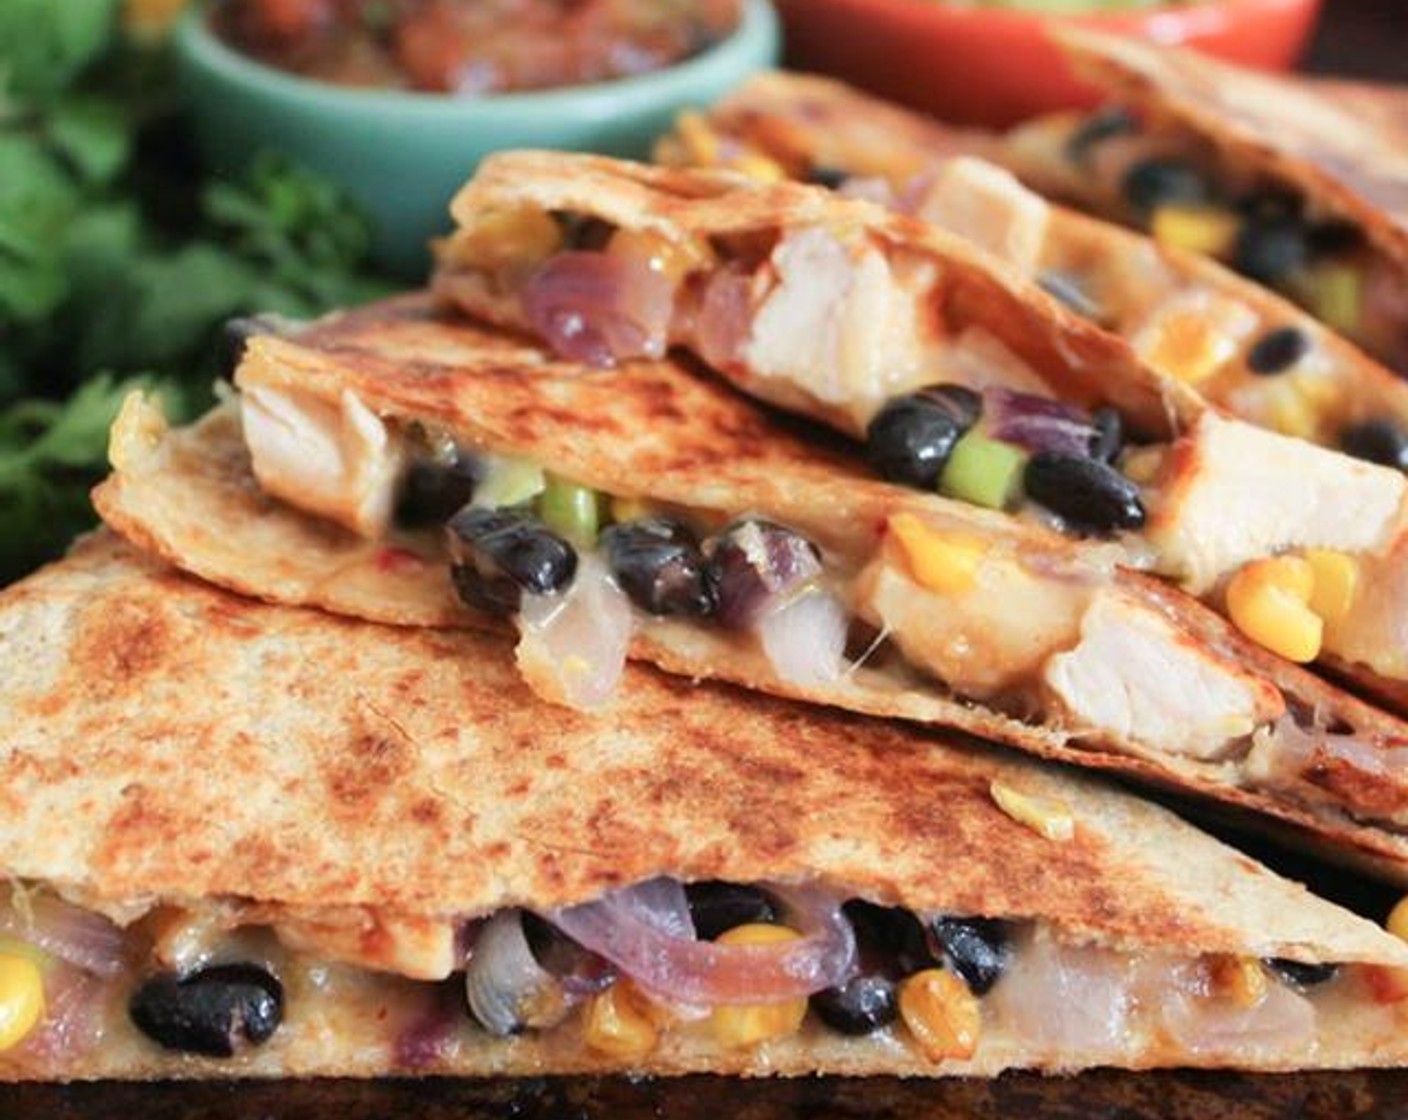 Spicy Chicken Quesadillas with Corn, Black Beans, and Caramelized Onions